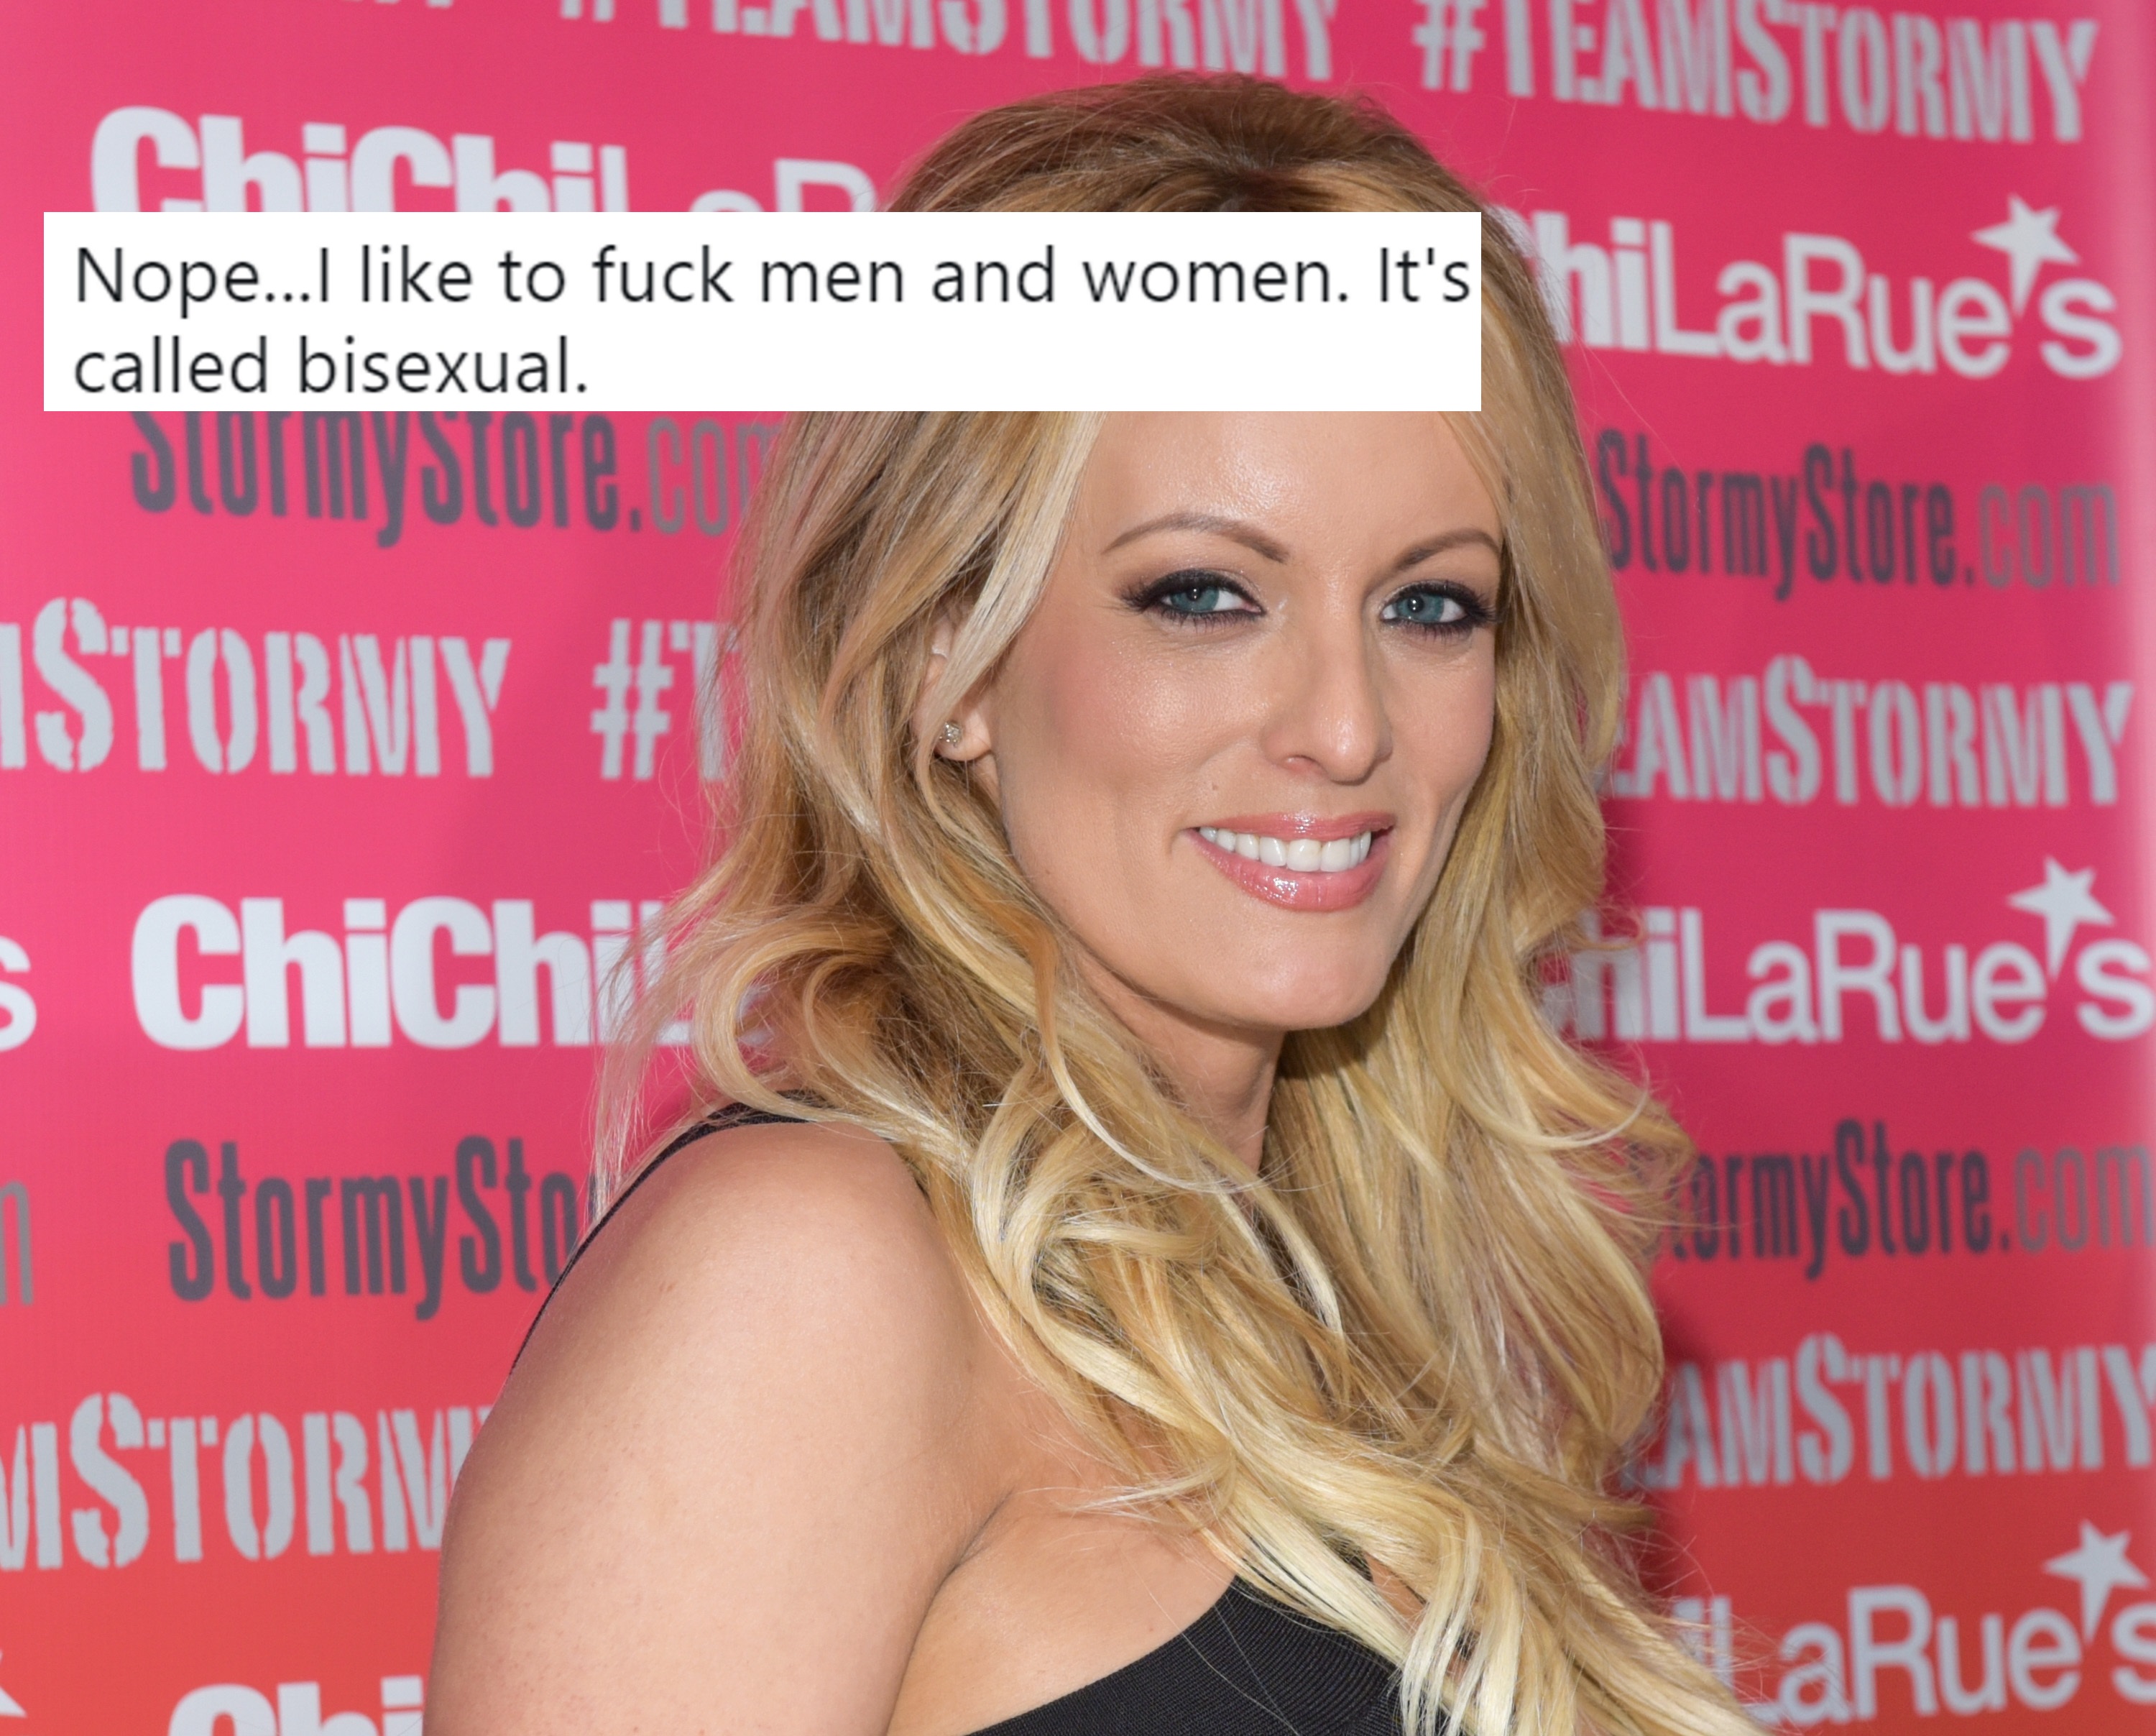 Sex Tara Fares 18 - Stormy Daniels comes out as bisexual in fiery Twitter argument | PinkNews